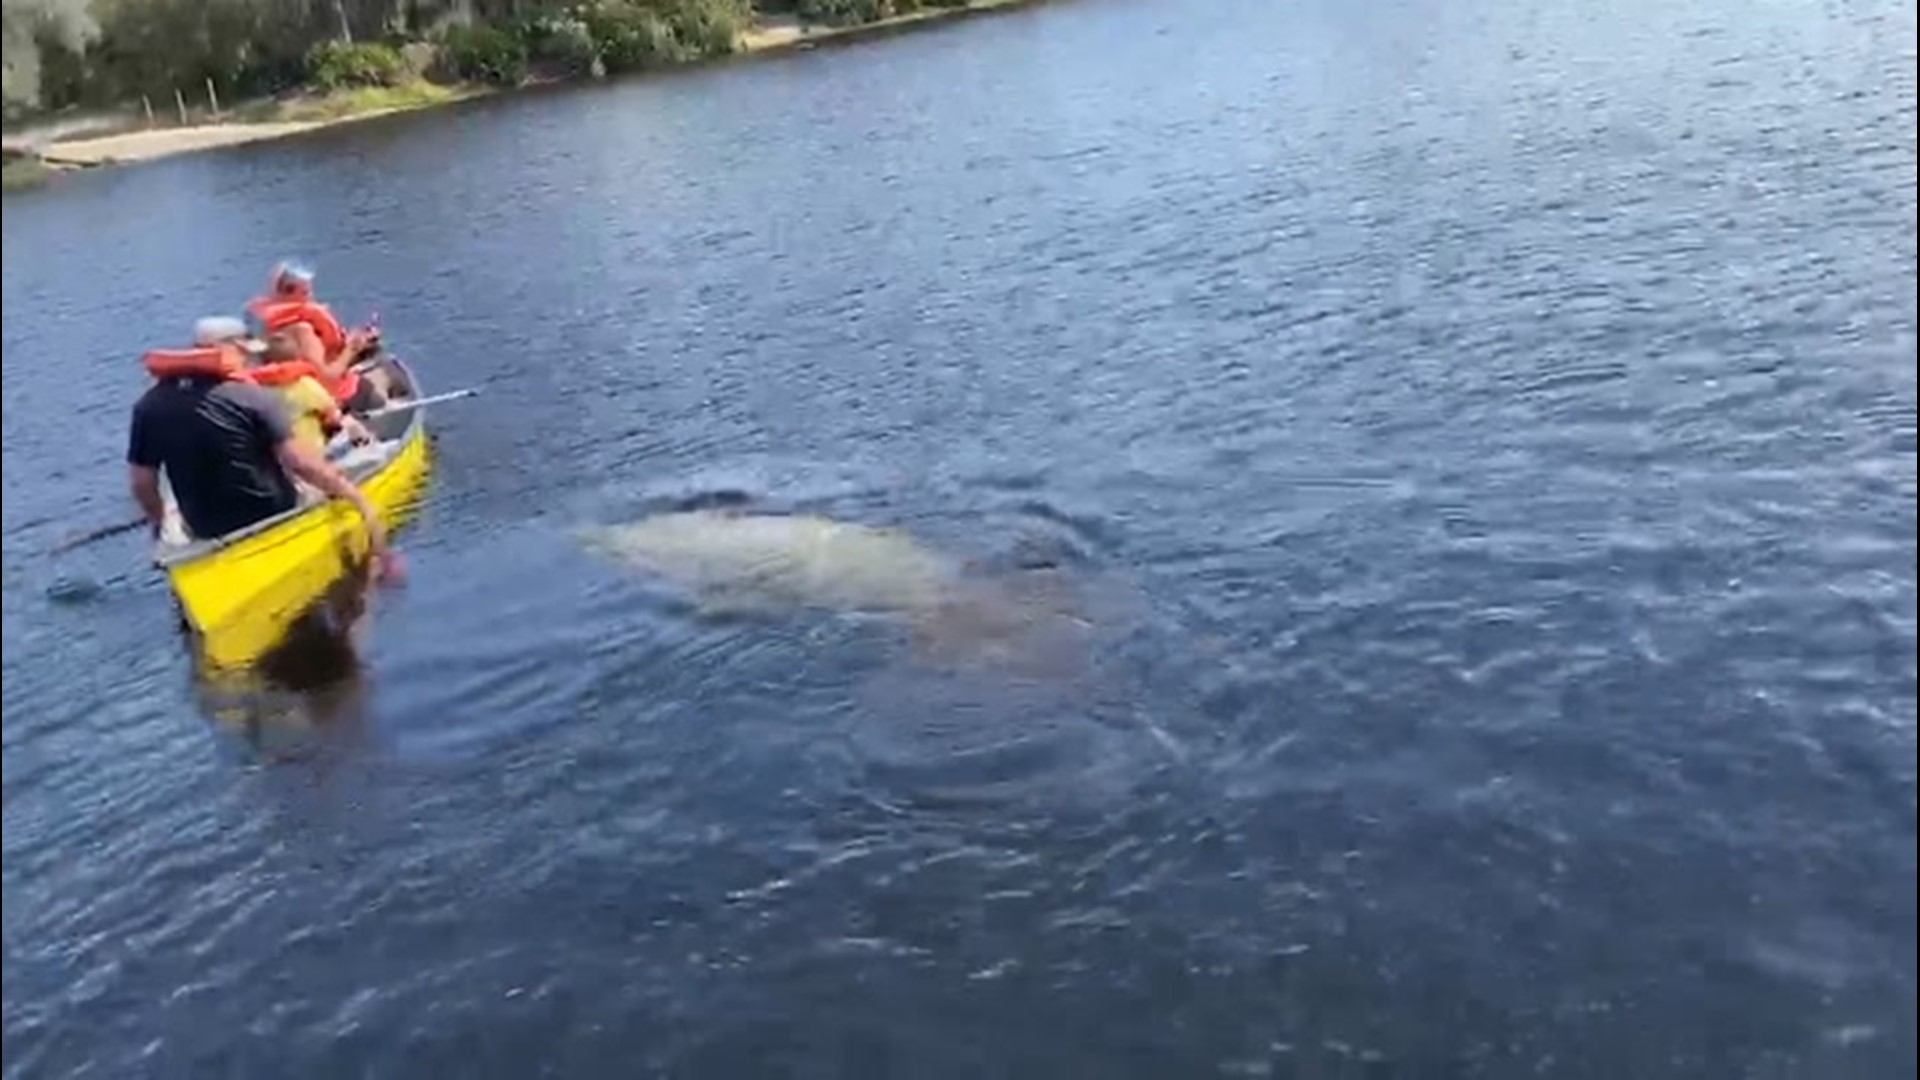 Some kayakers on the Saint Johns River, near Orange City, Florida, received a special visit from some manatees on Feb. 24.